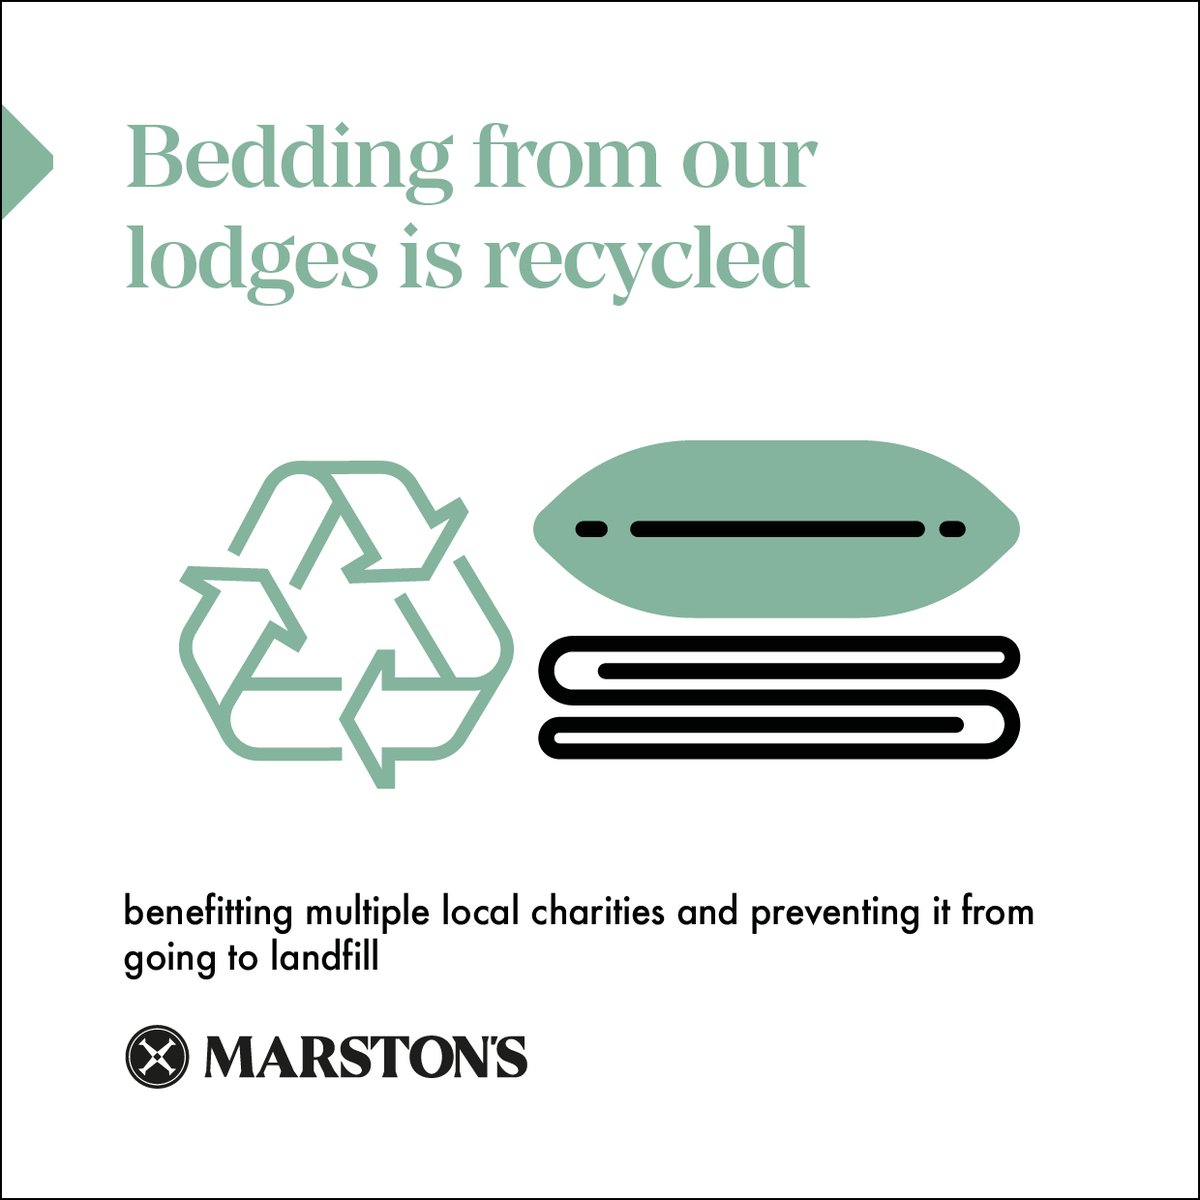 The garden furniture at many of our managed sites is made from 100% recycled plastic waste. So far, we’ve saved 210 tonnes of low-grade plastic waste from going to landfill or incineration. #marstons #wearemarstons #wecare #sustainability